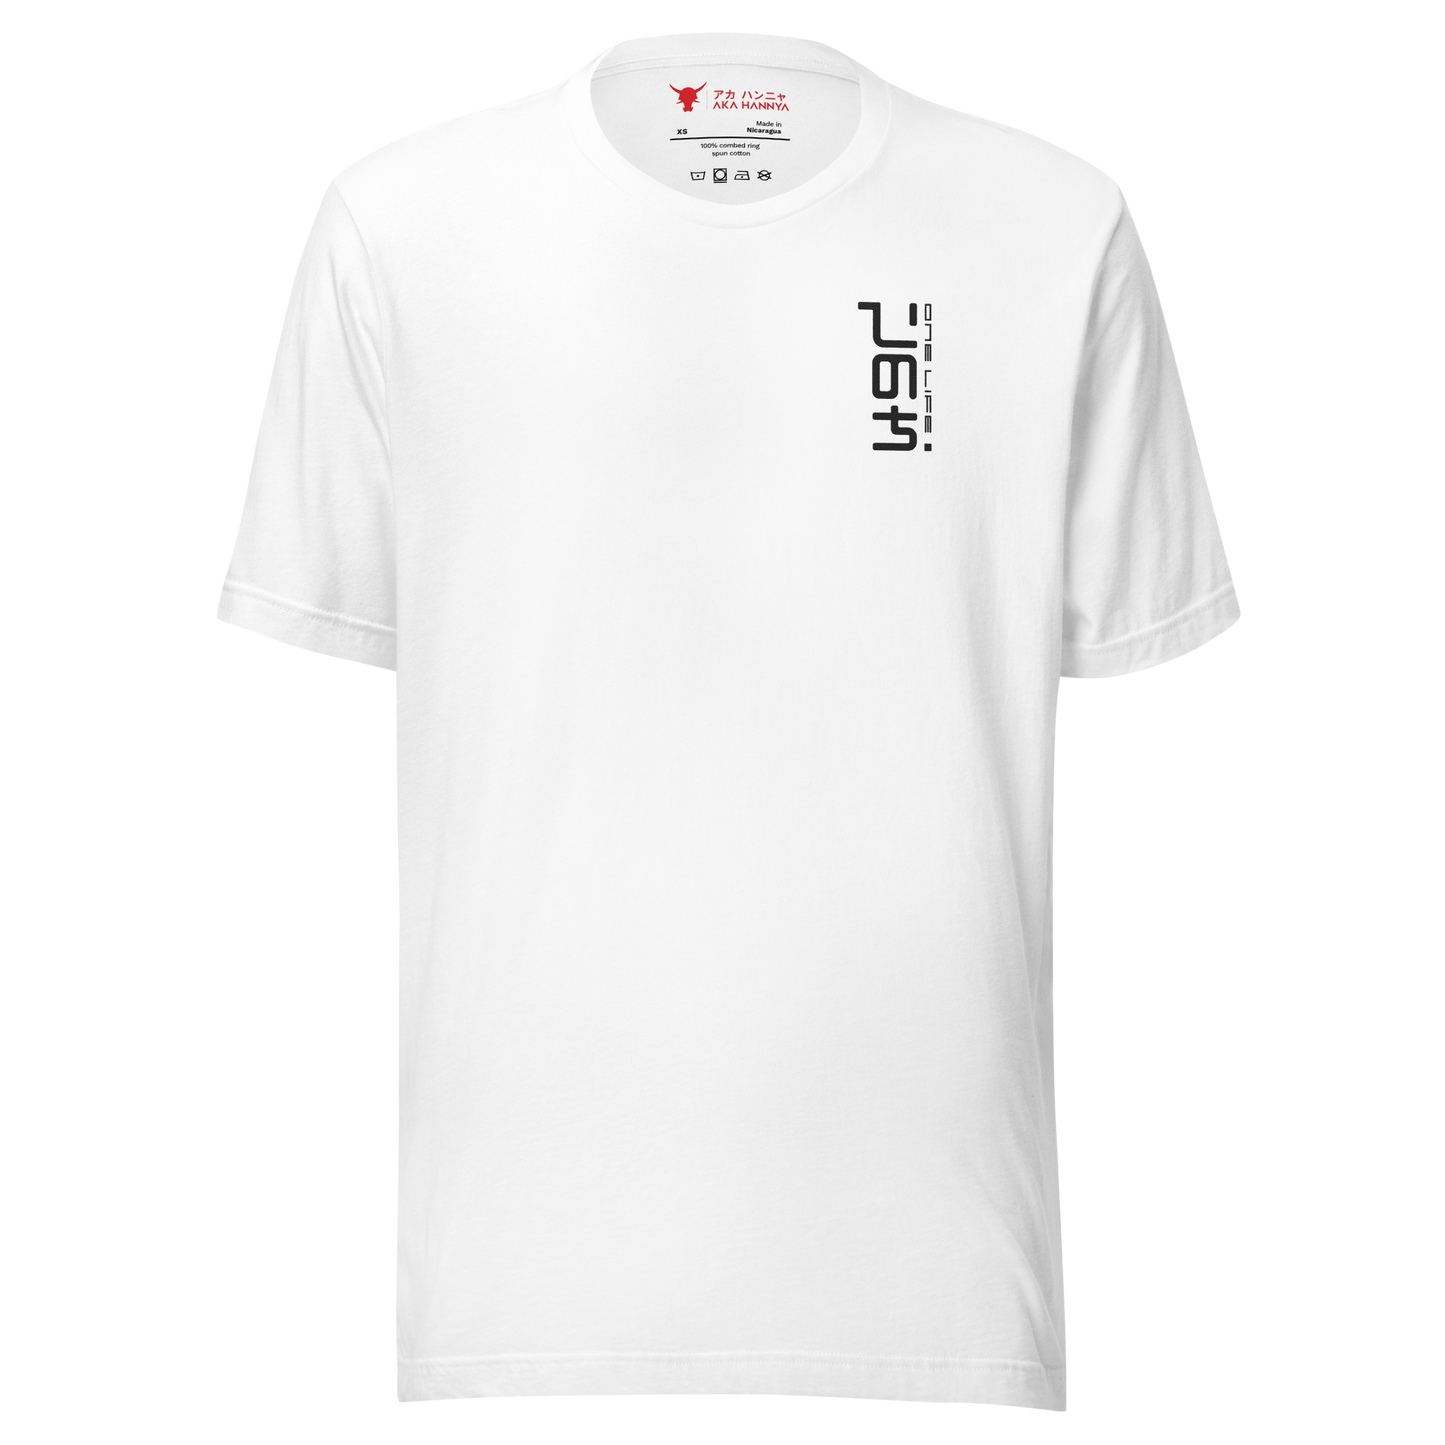 One-Life tee white front side on transparent bakground